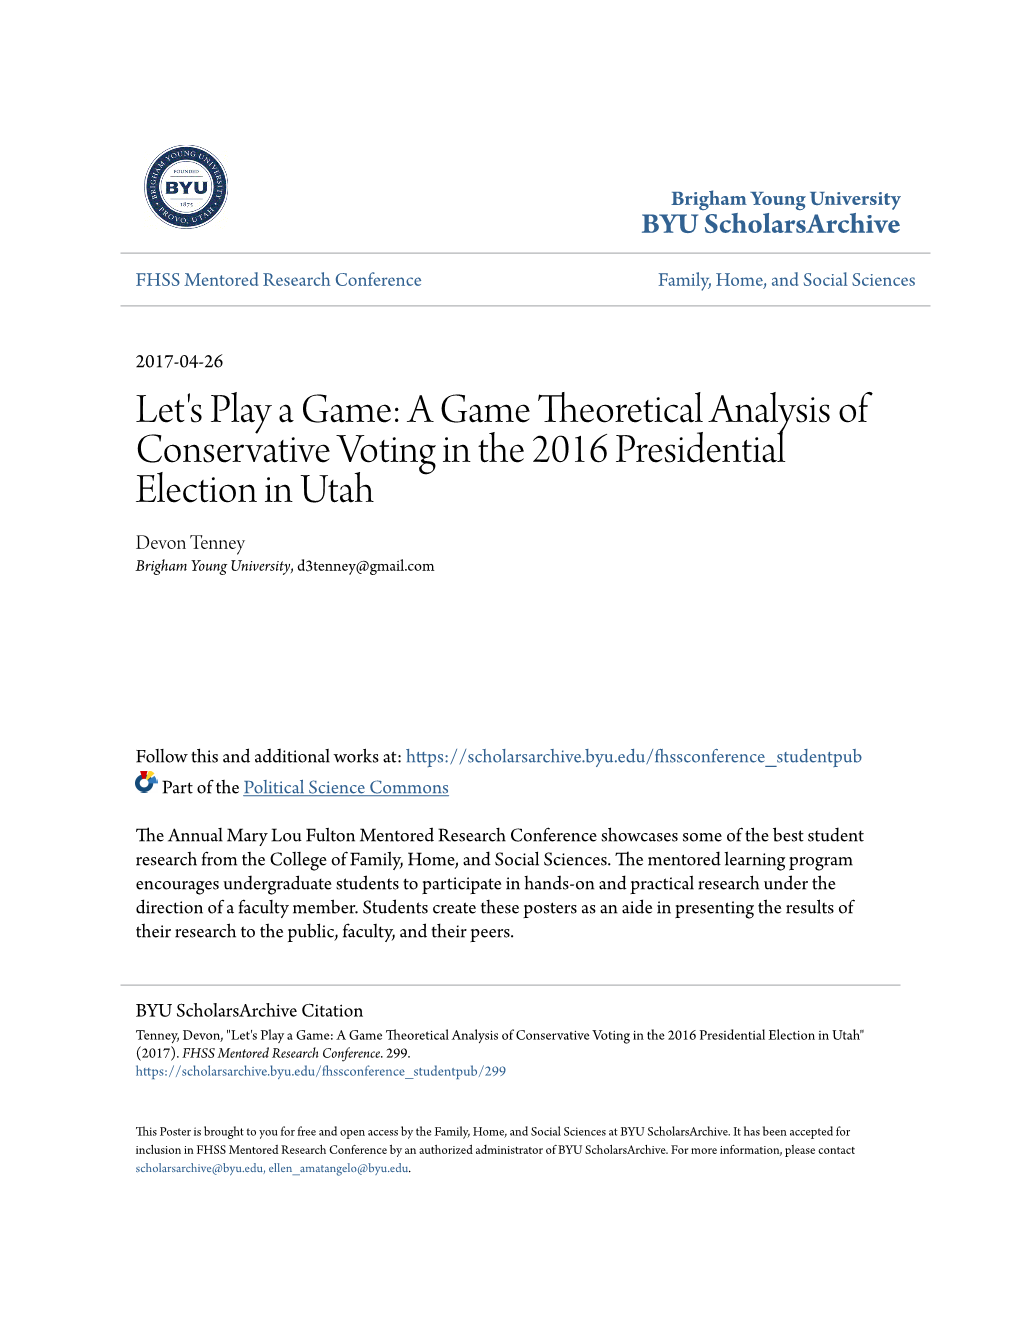 A Game Theoretical Analysis of Conservative Voting in the 2016 Presidential Election in Utah Devon Tenney Brigham Young University, D3tenney@Gmail.Com